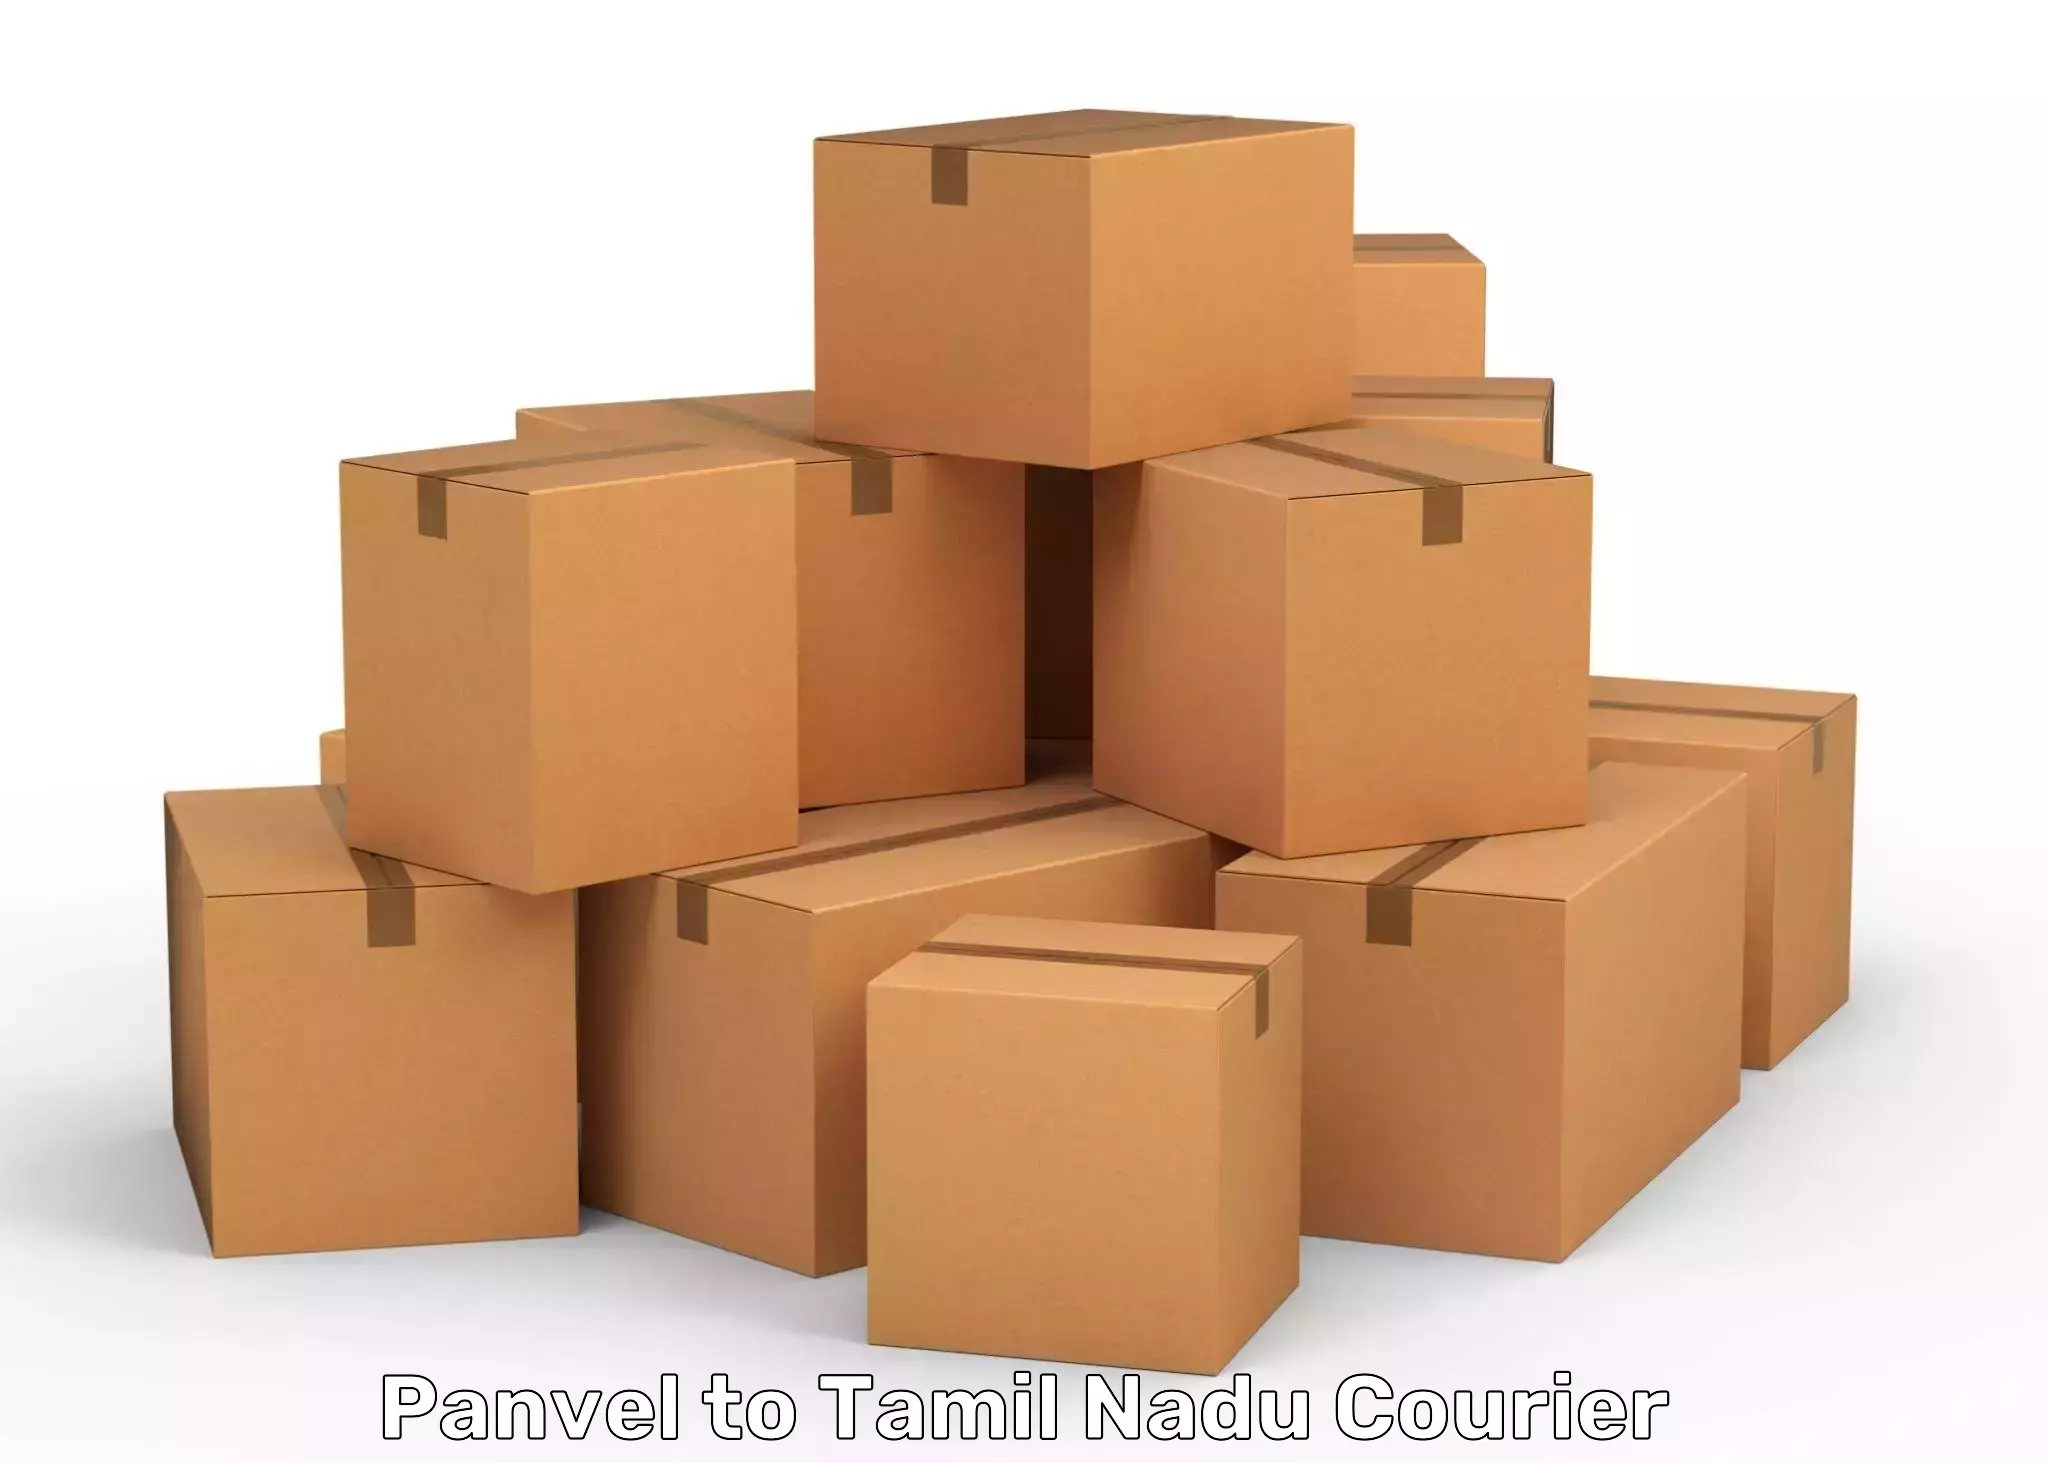 Courier service efficiency Panvel to Perunali